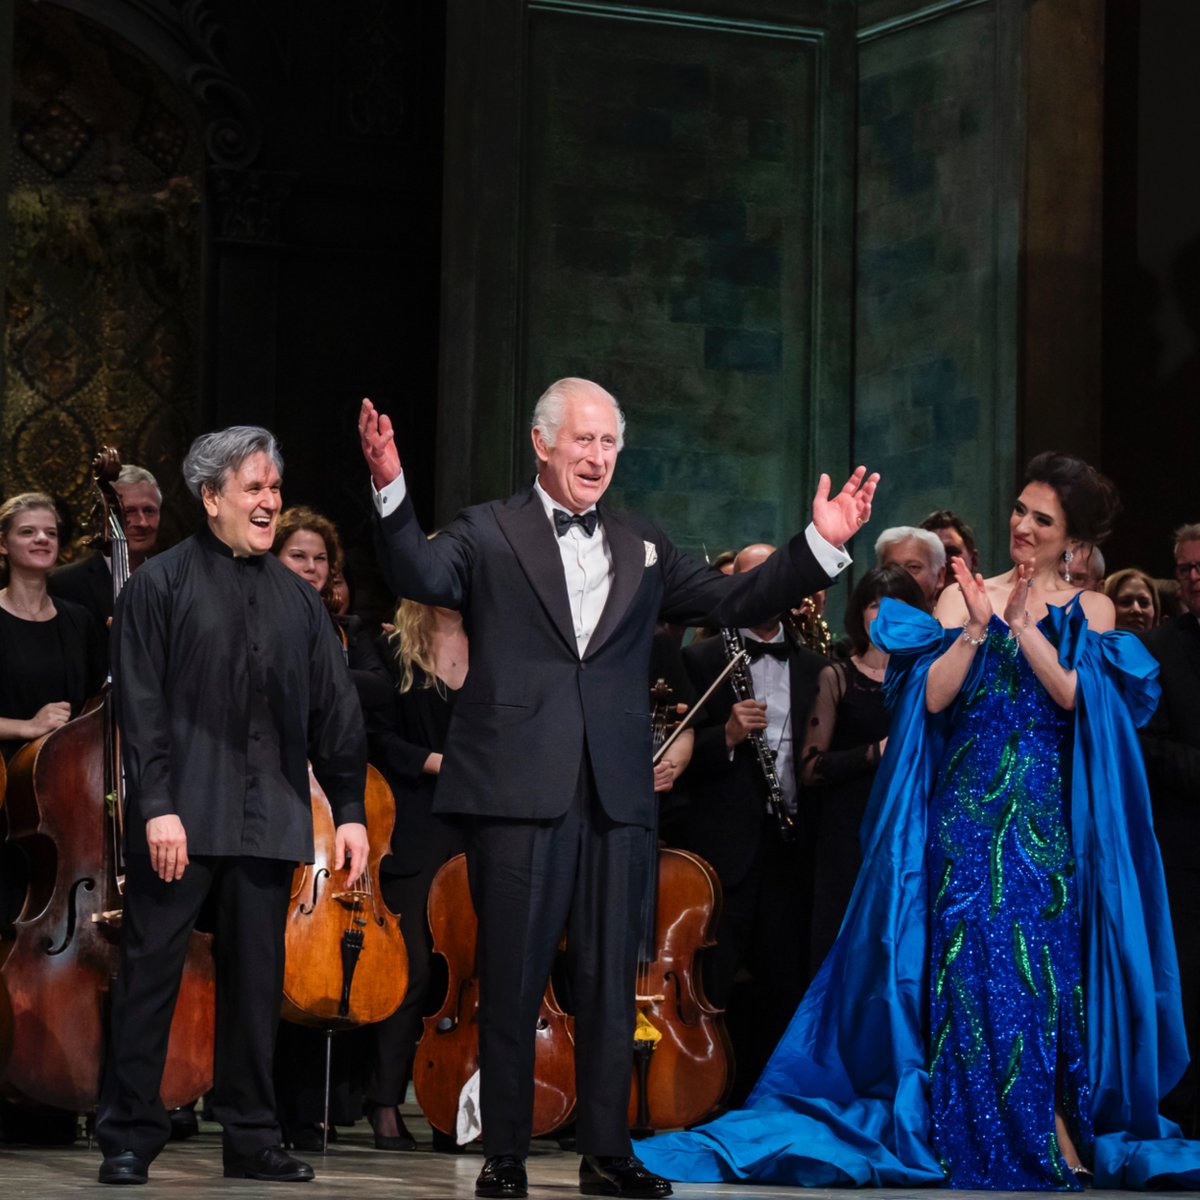 Last night, His Majesty King Charles III joined audiences for a special gala performance to celebrate The Royal Opera’s longest serving Music Director, Antonio Pappano.